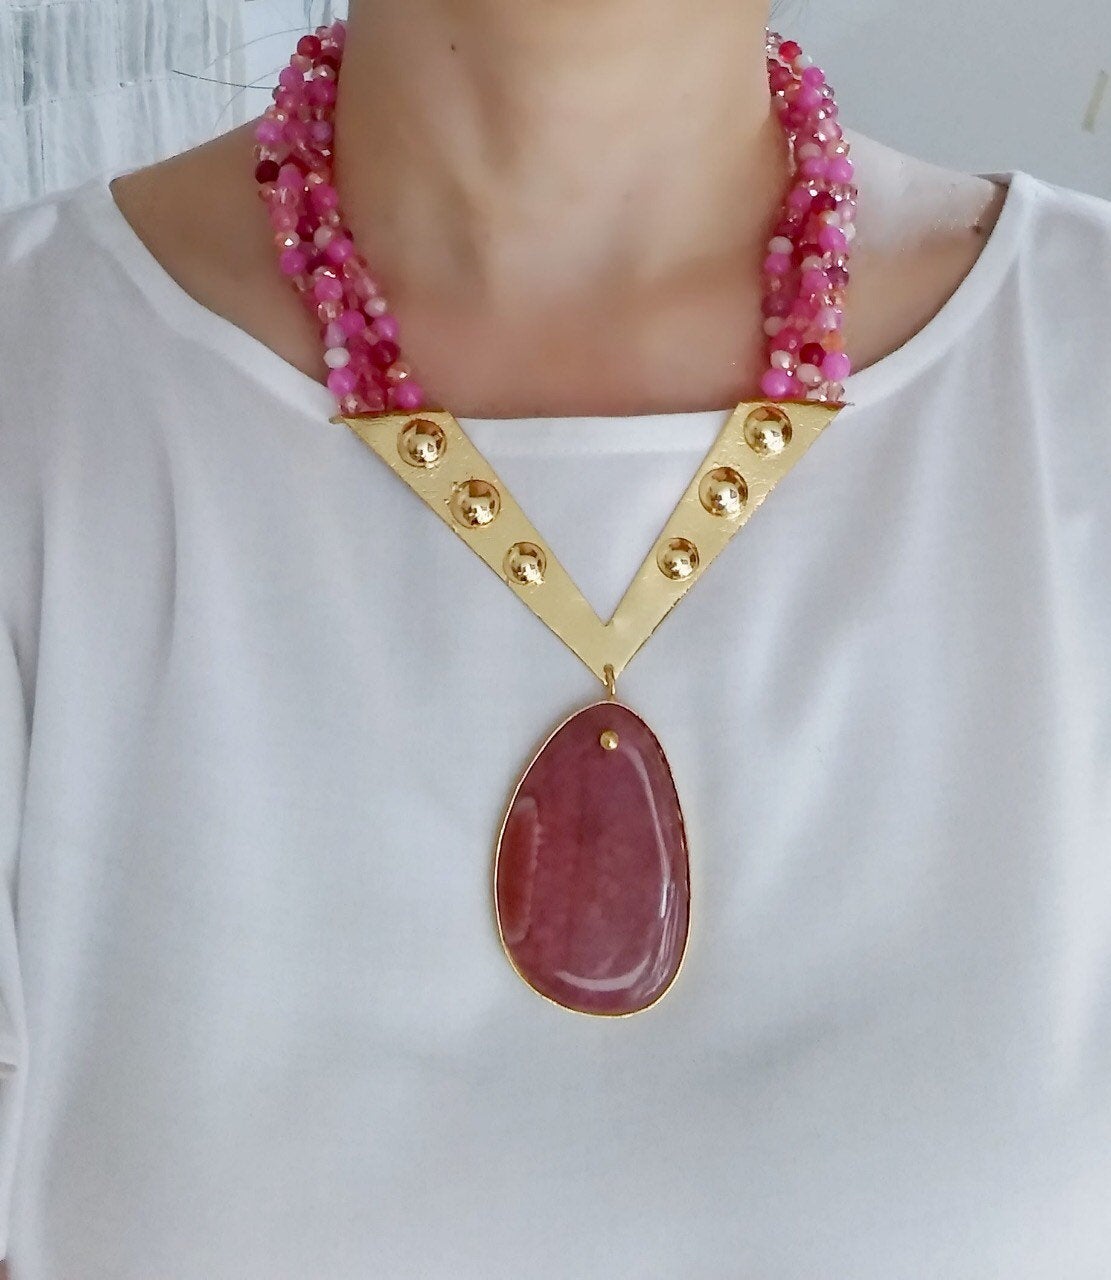 Handmade Agate Necklace And Earrings In Bronze Double Gold Plated In 24k Gold